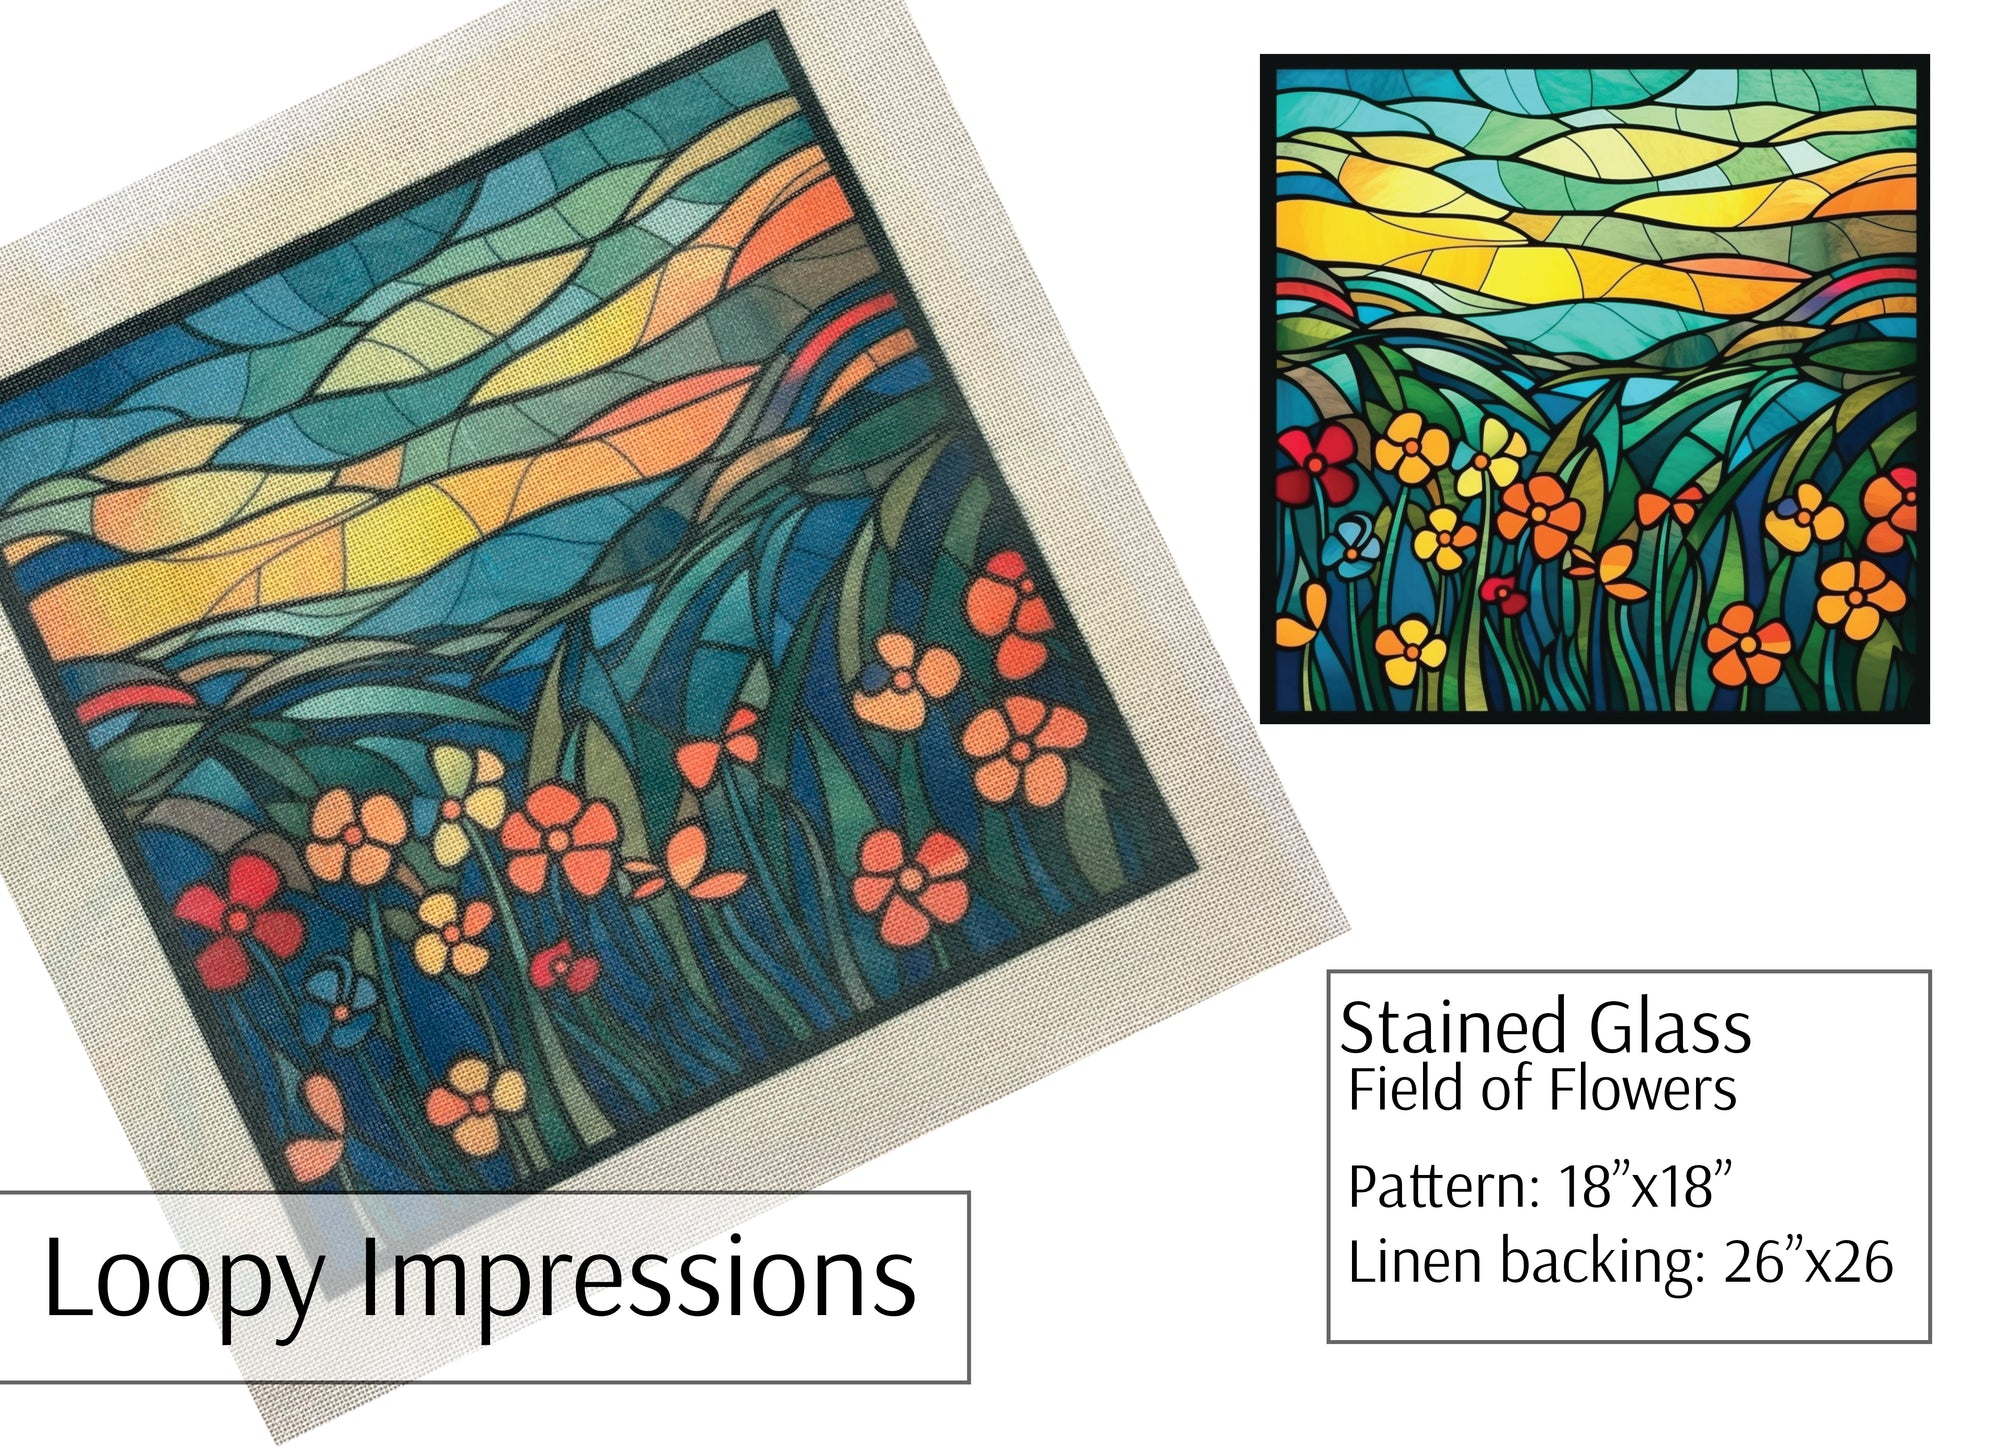 Loopy Impressions Full Color Pattern - Stained Glass Field of Flowers